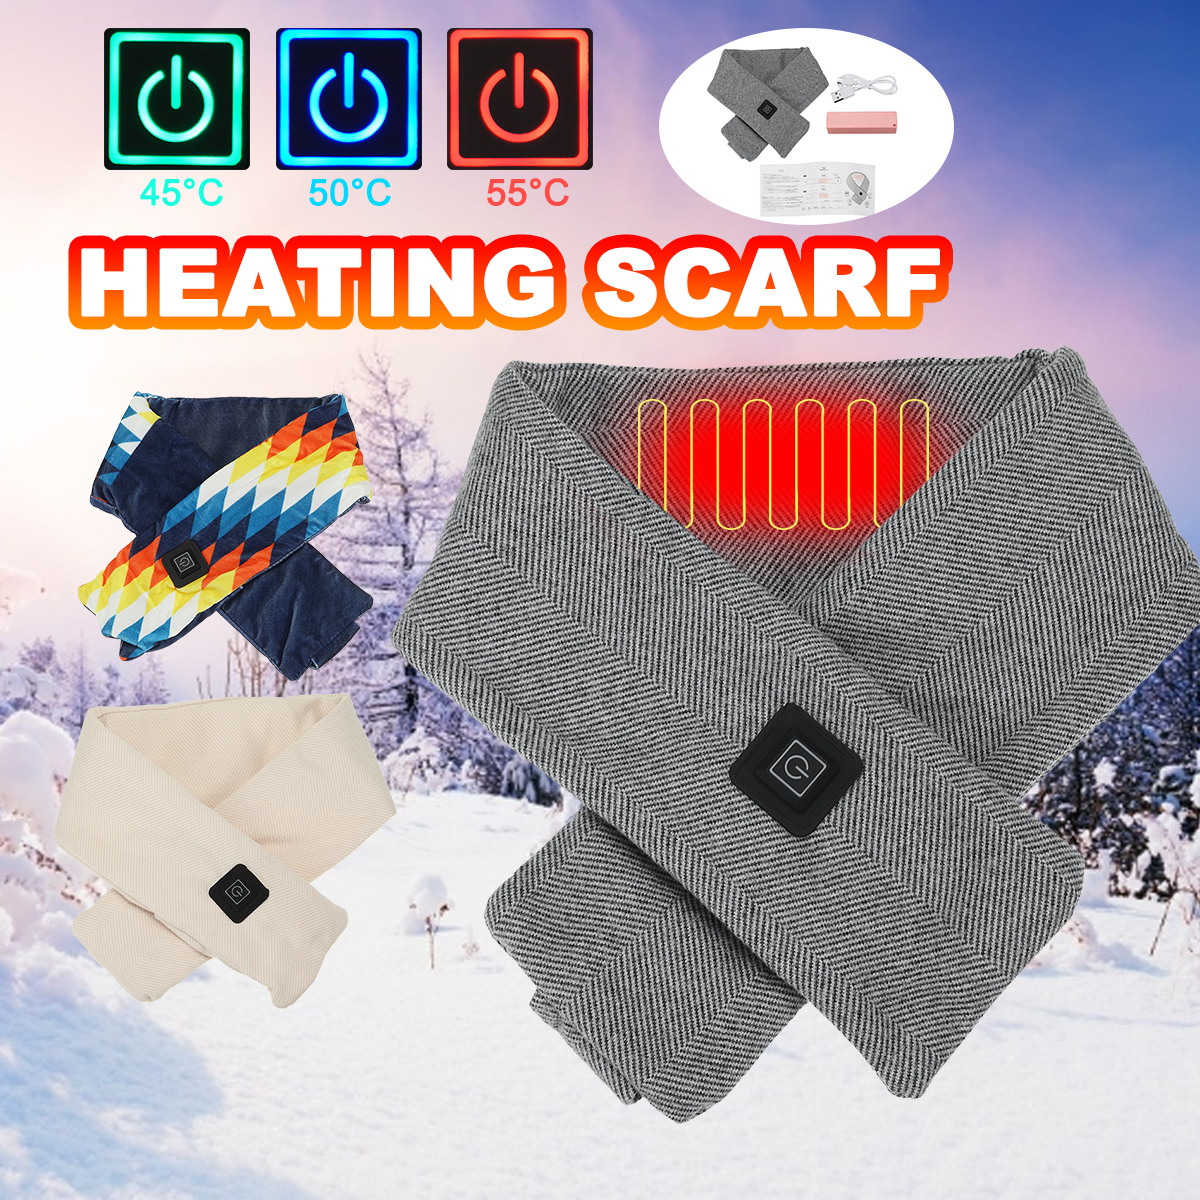 Unisex-Heating-Scarf-USB-Winter-Electric-Warming-Scarf-Neck-Protector-Cold-Charging-Scarf-For-Campin-1917320-1